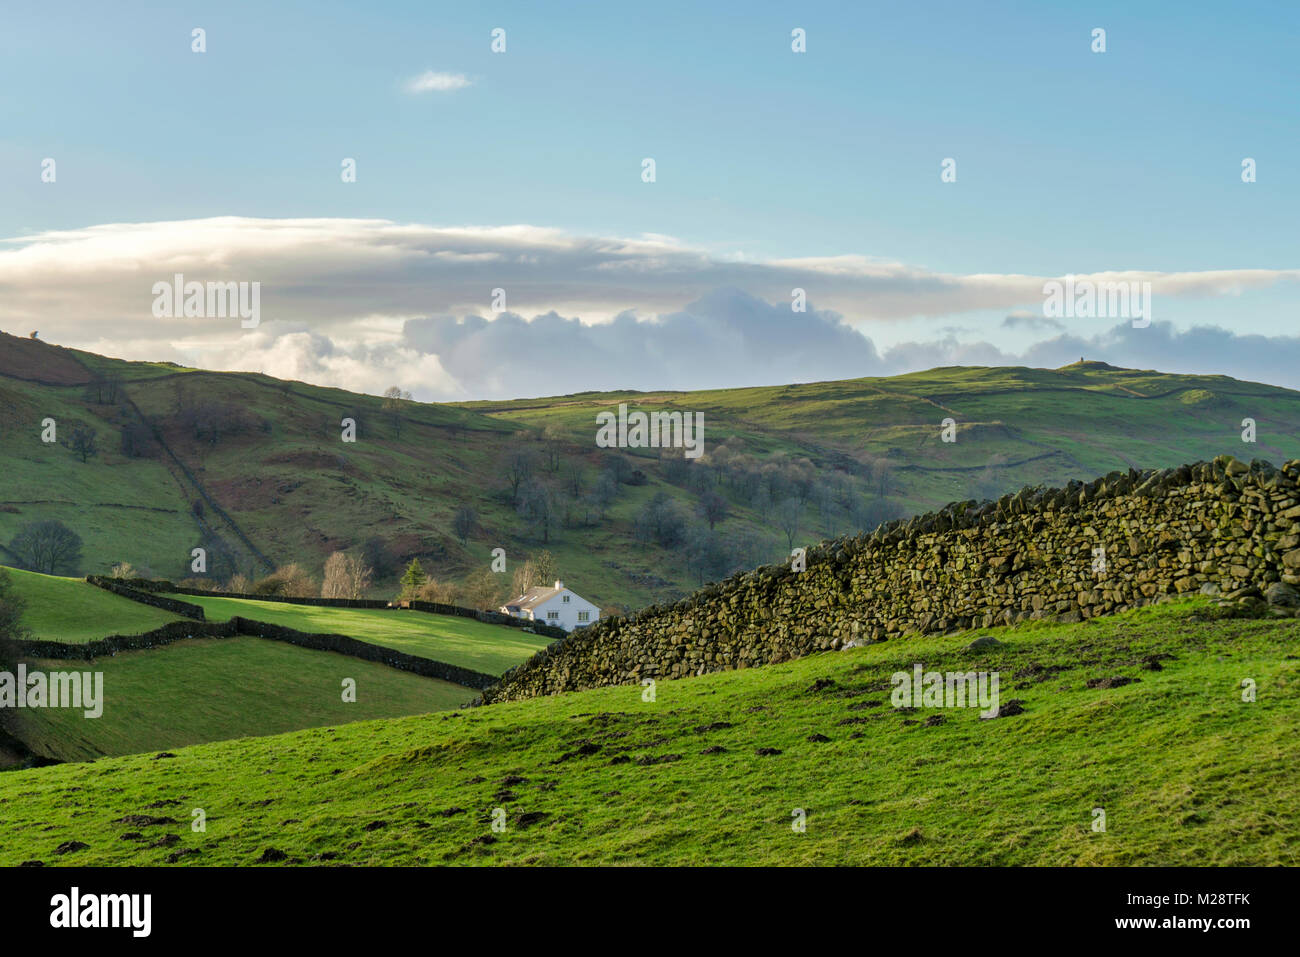 A remote farmhouse in the Cumbrian countryside Stock Photo